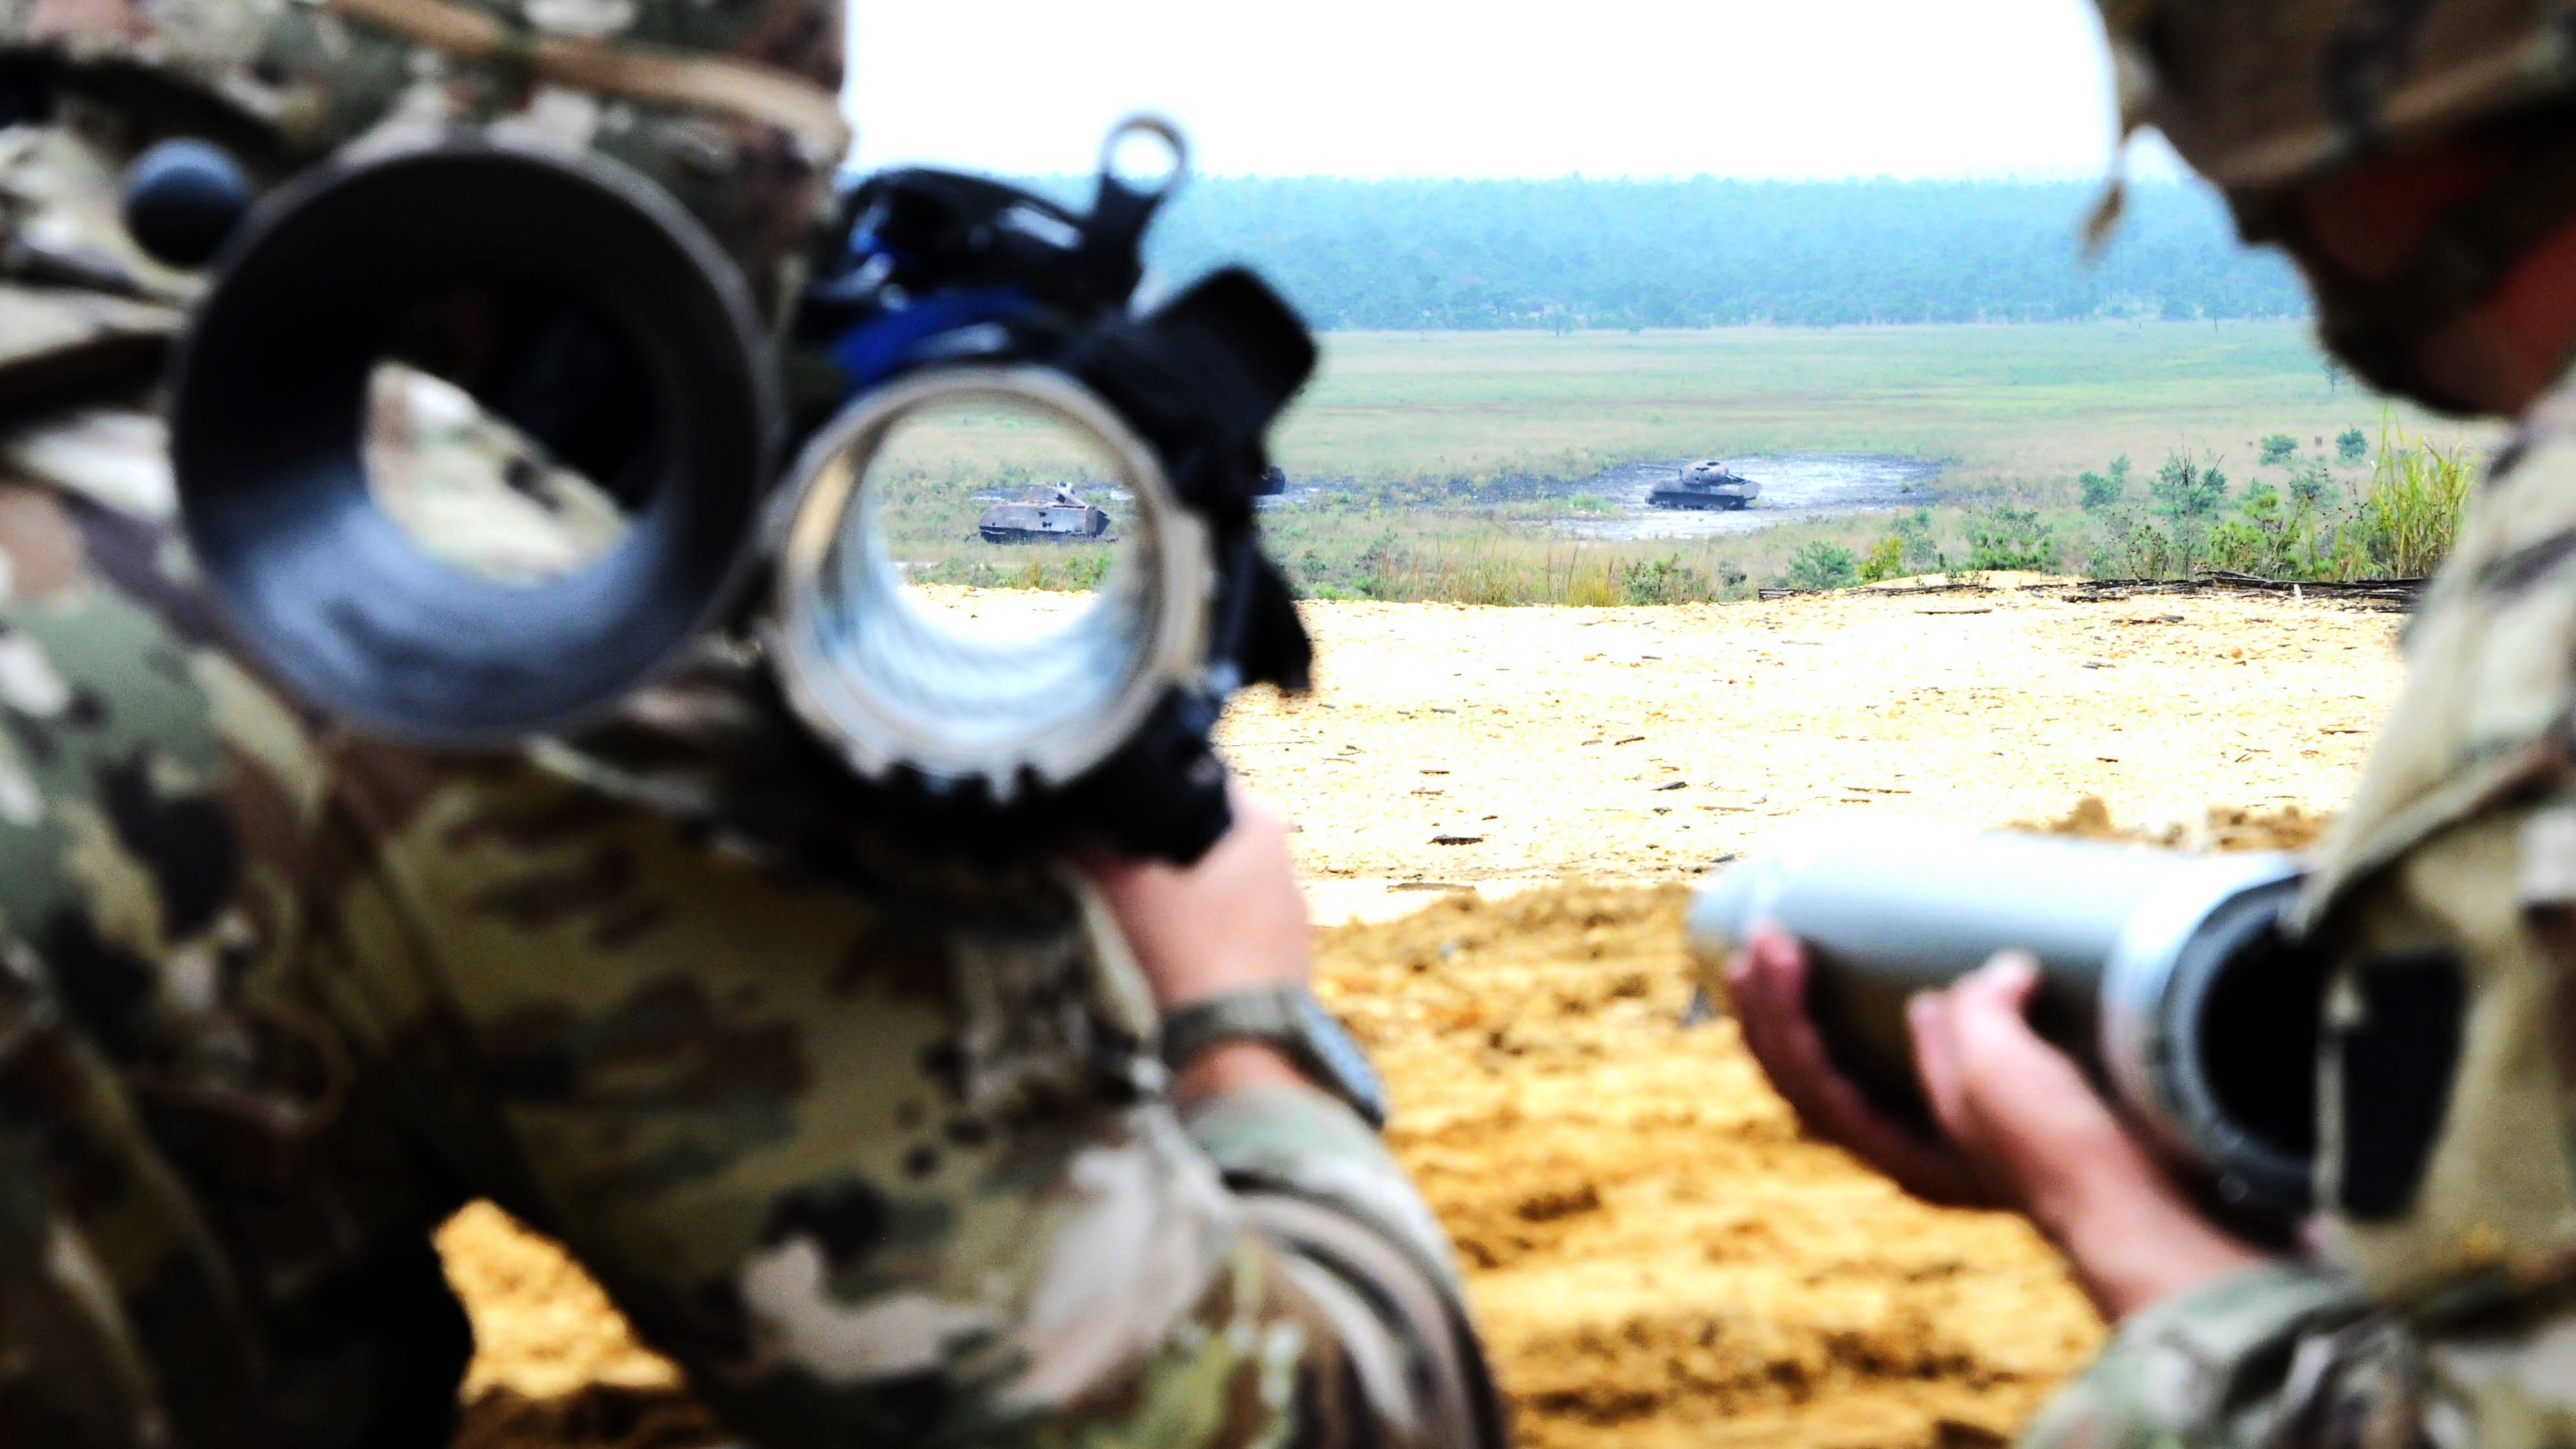 Soldiers of the 1 BN 175 INF Battalion Received training from instructors on range 59C at Fort Dix in New Jersey with the Gustav Recoilless Rifle.